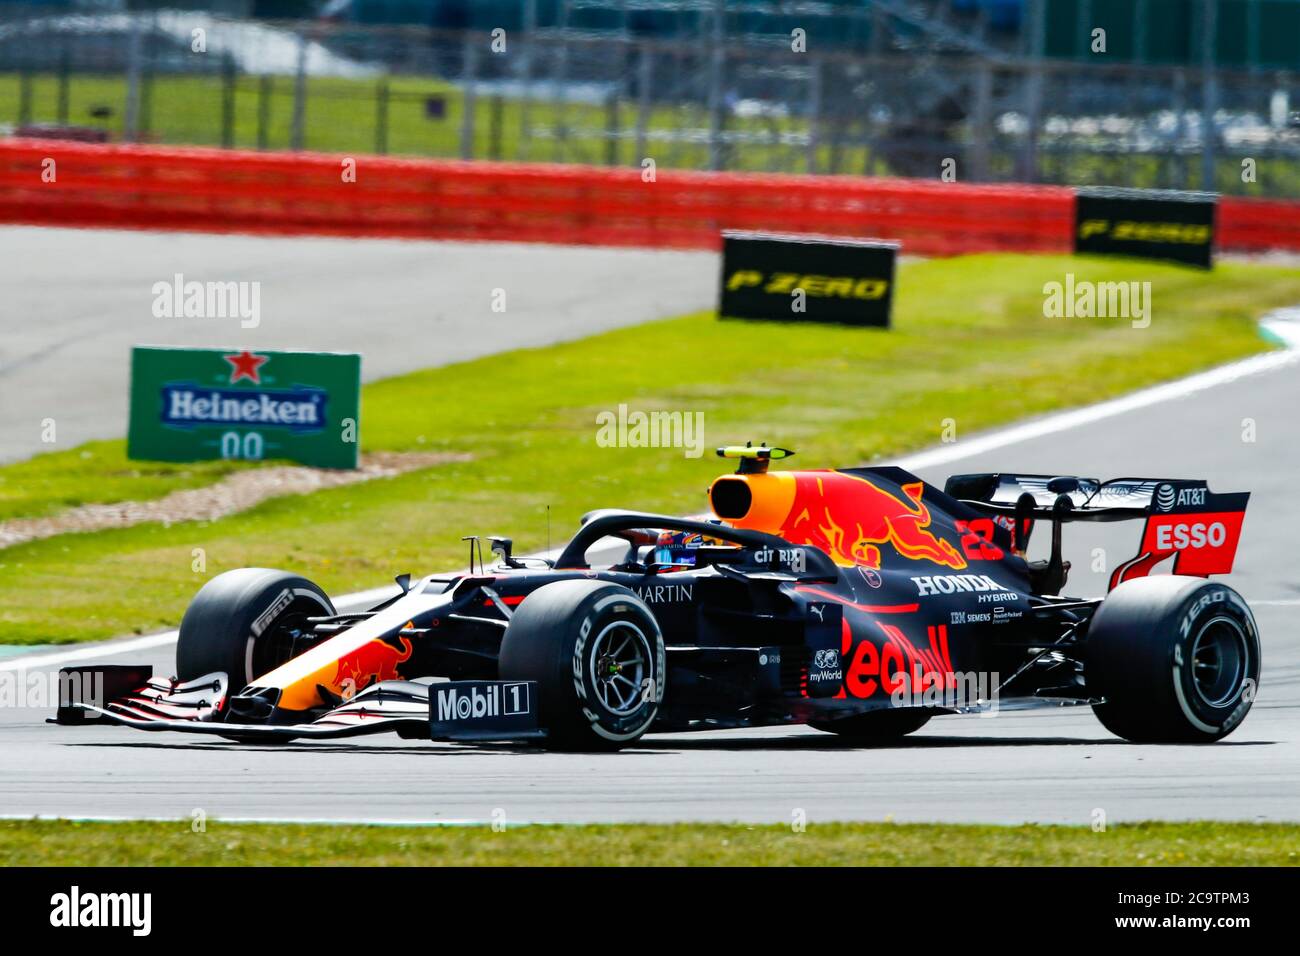 Alexander Albon of Red Bull during the 2020 British Grand Prix at Silverstone, Northamptonshire. Stock Photo